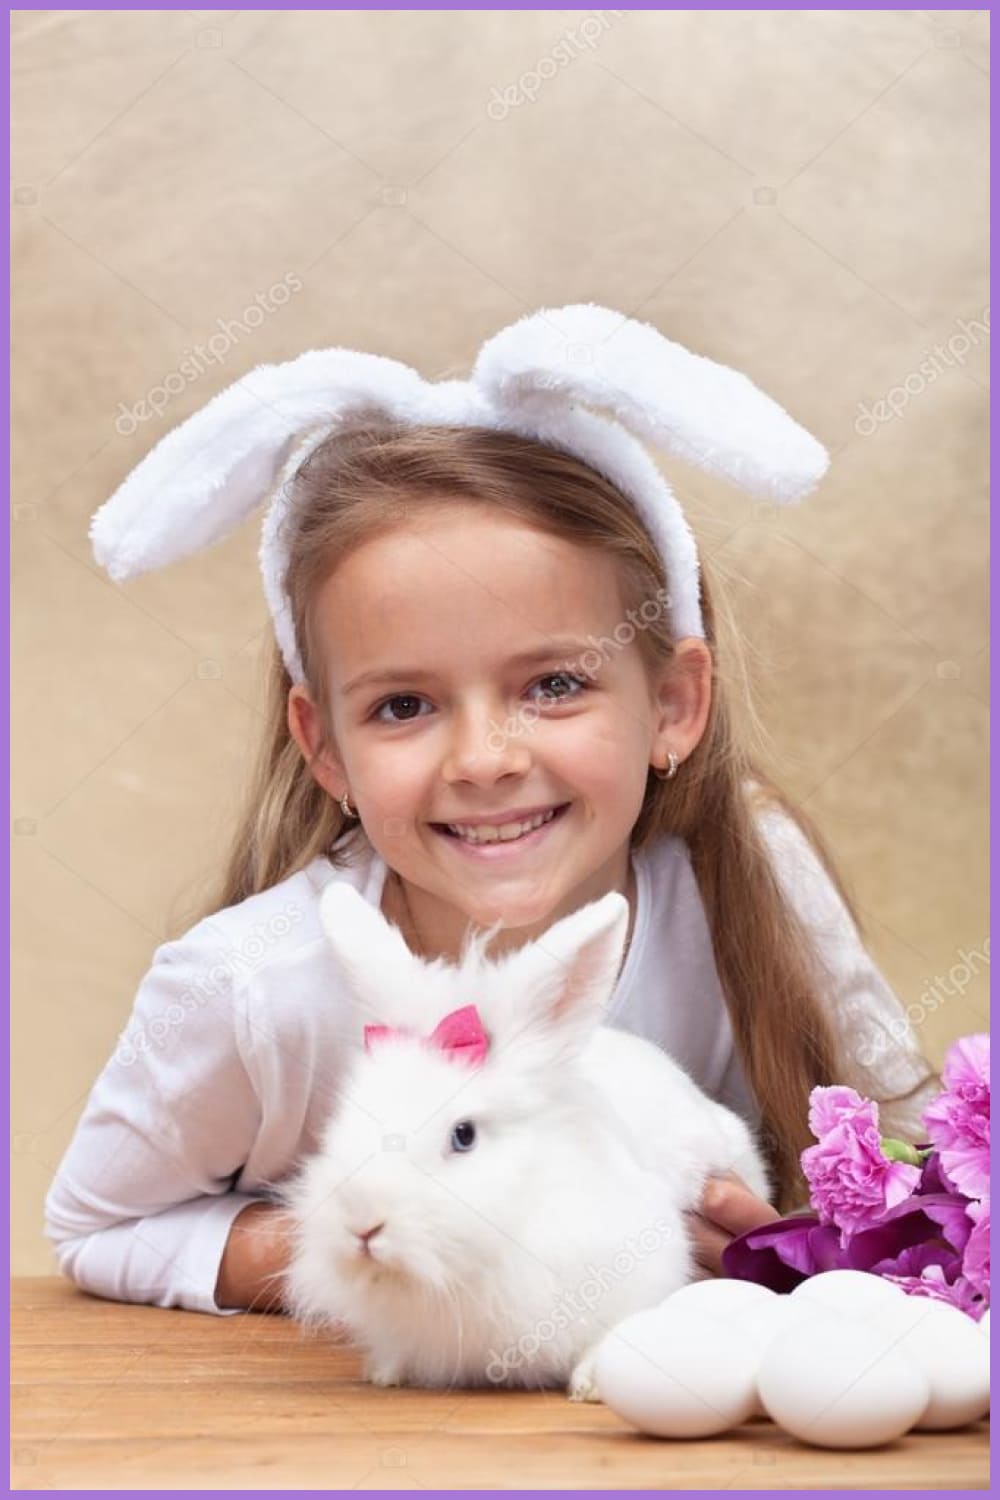 Happy little girl with bunny ears and her cute white rabbit.